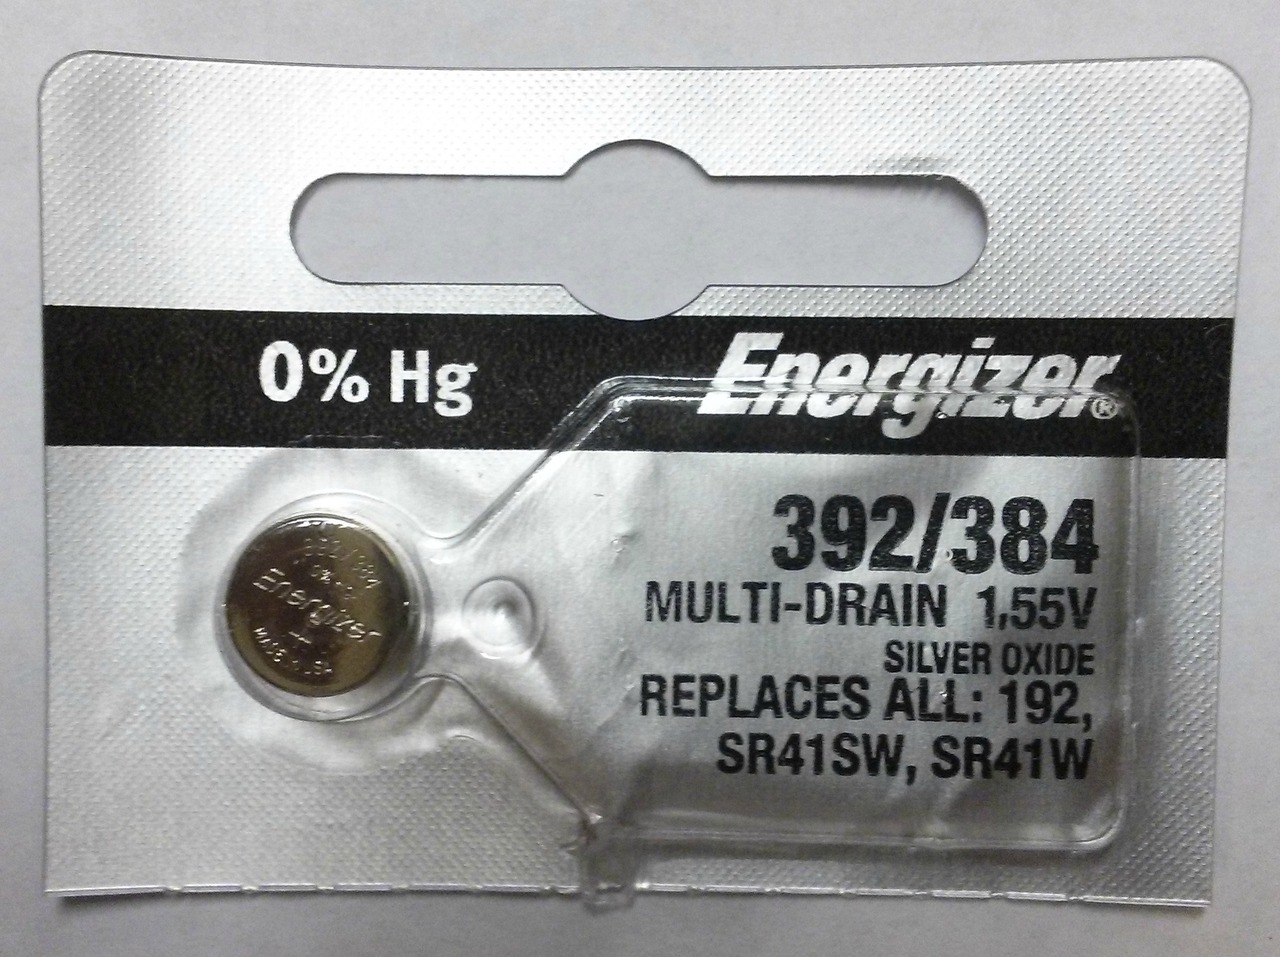 Energizer 384/392 - SR41SW Silver Oxide Button Battery 1.55V - 1 Pack + FREE SHIPPING!